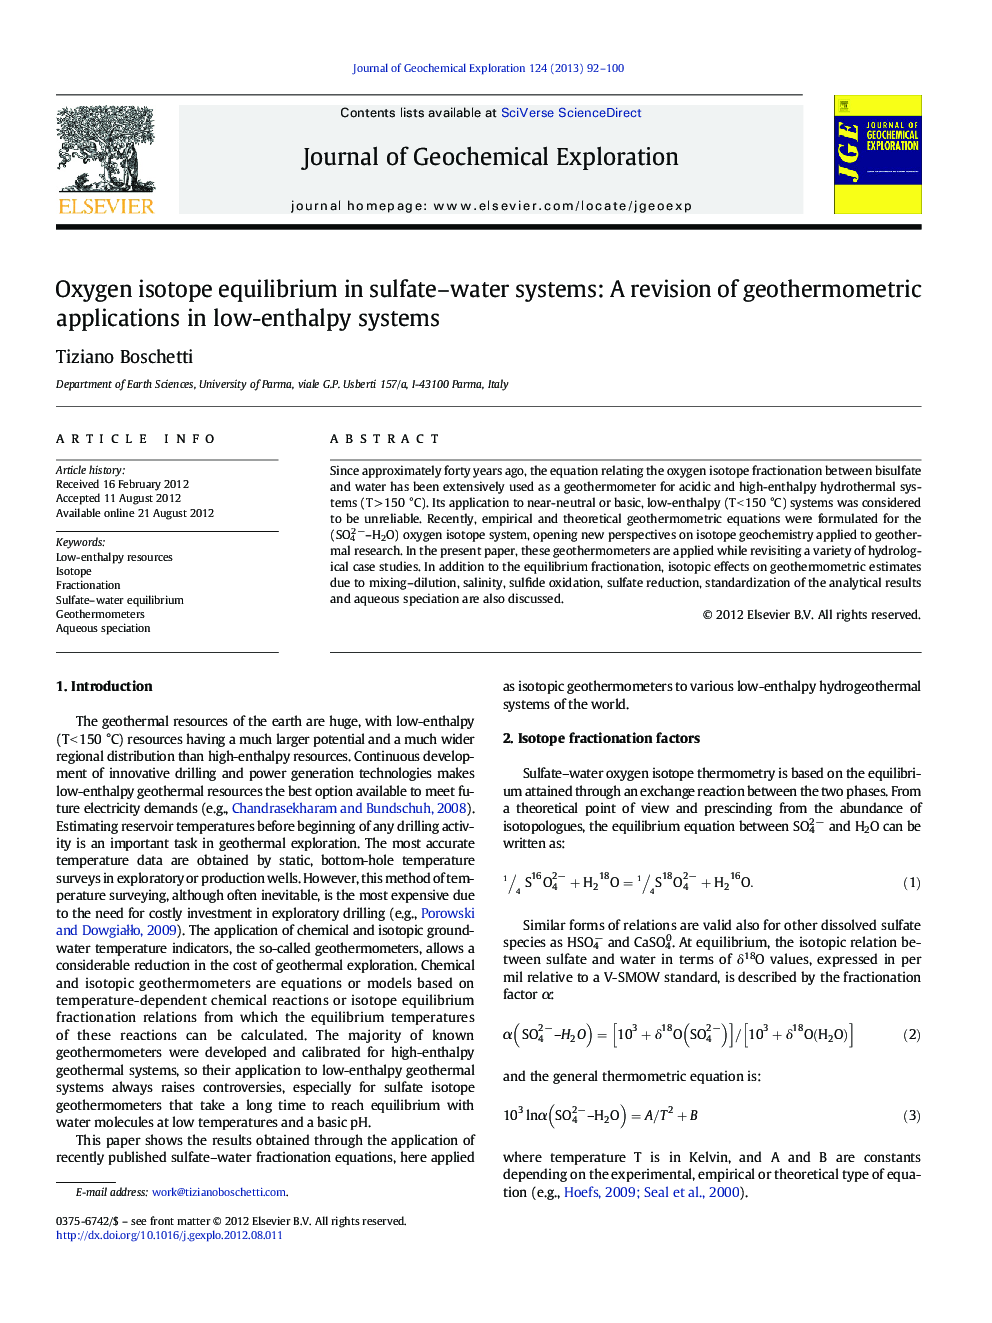 Oxygen isotope equilibrium in sulfate–water systems: A revision of geothermometric applications in low-enthalpy systems